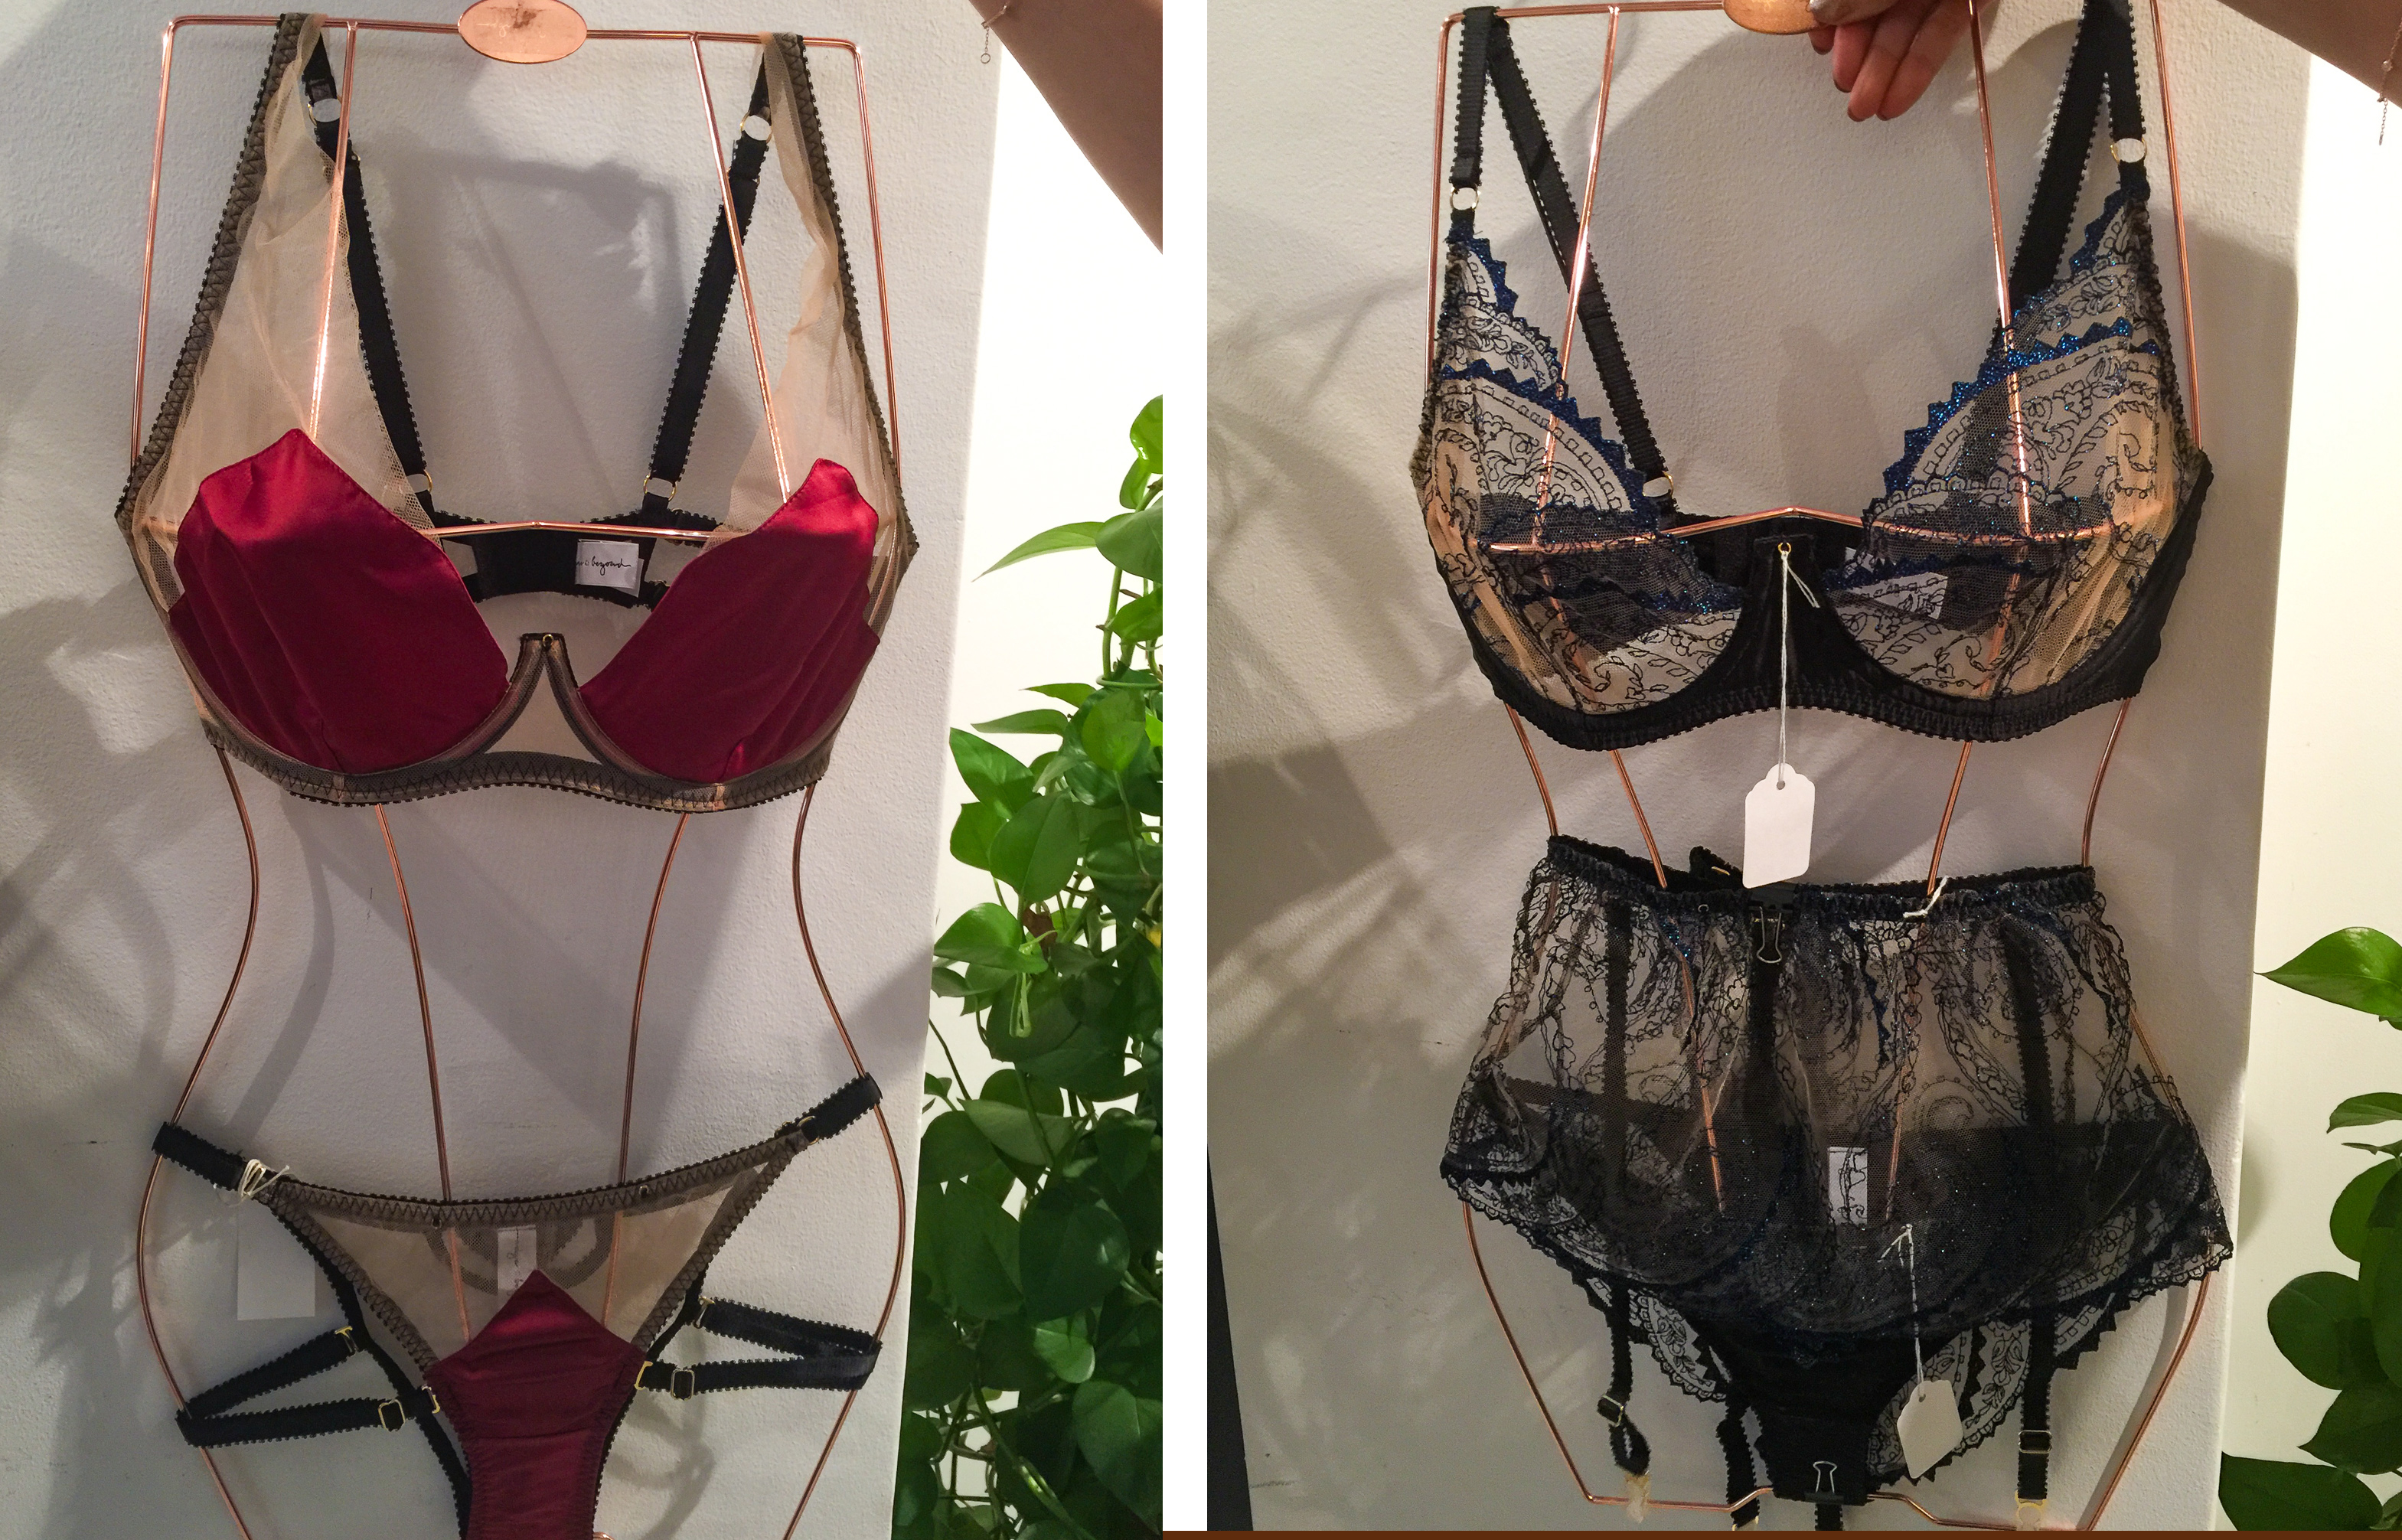 Review of The Lingerie Selection